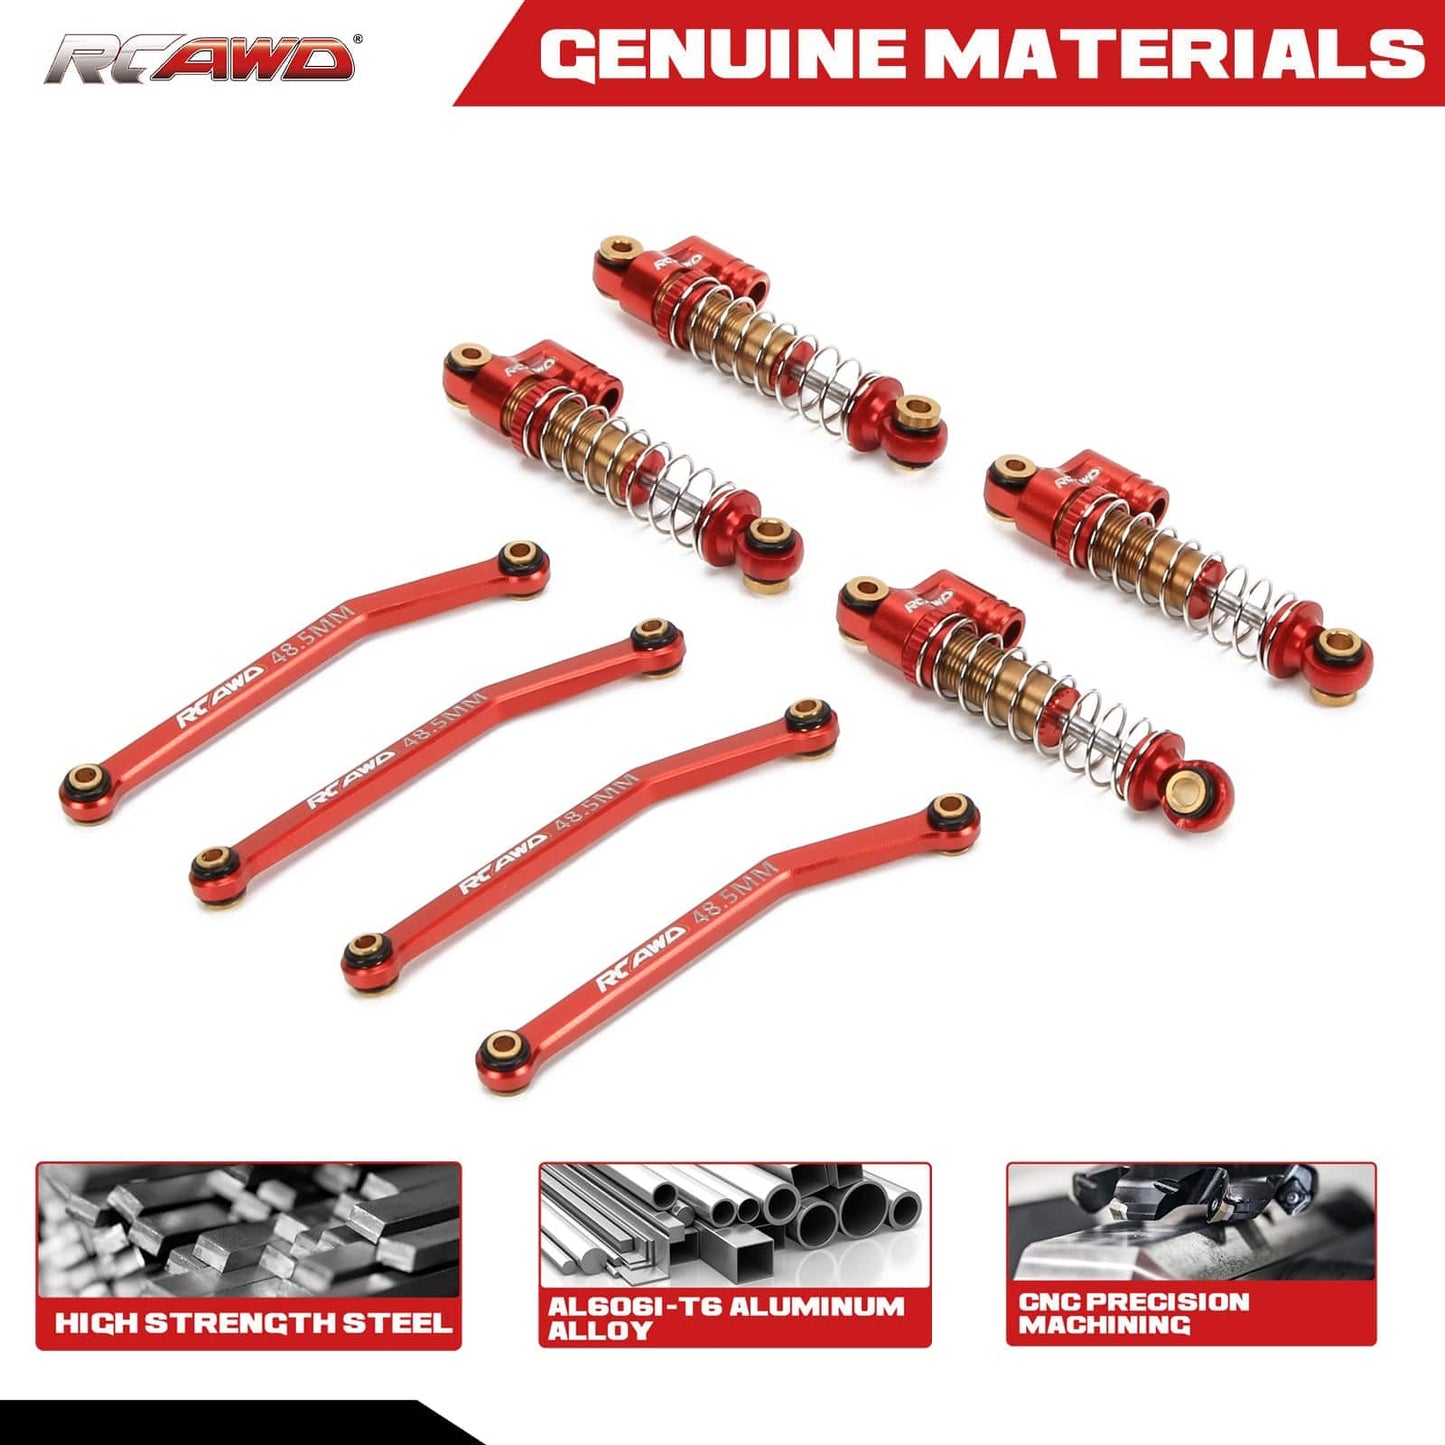 RCAWD FMS FCX24 Upgrades F/R Damper Shock Absorber Oil - Filled Type with 48.5mm Links - RCAWD